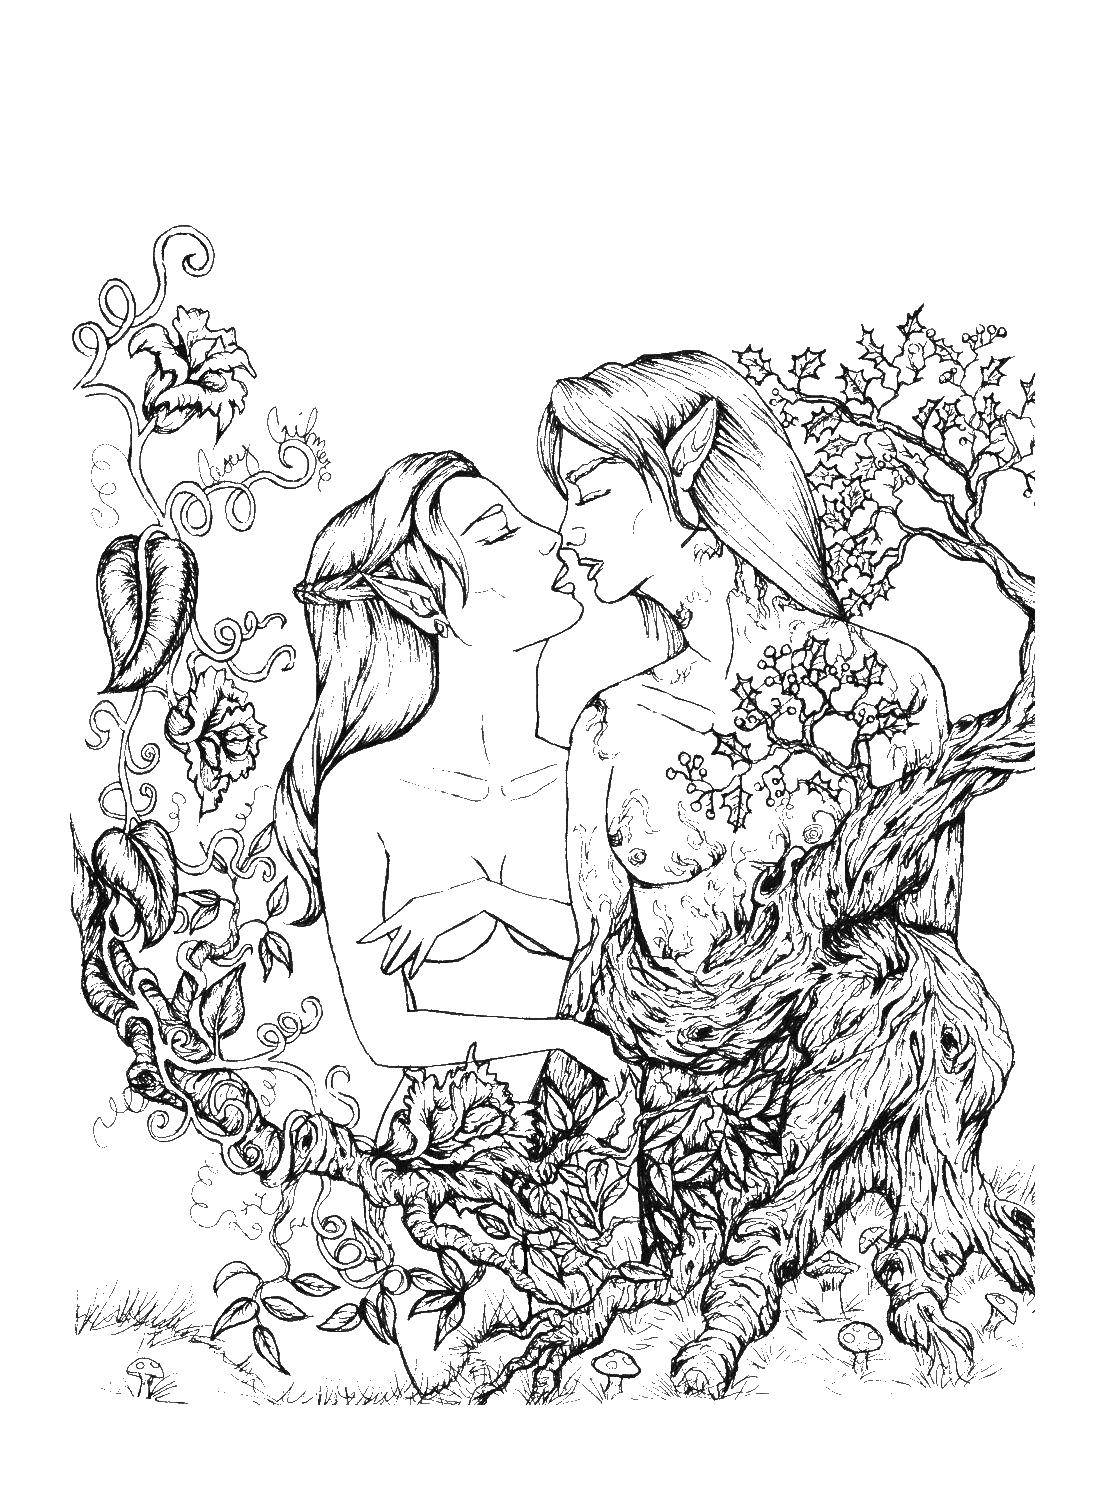 Coloring Elves kissing. Category For teenagers. Tags:  elves.